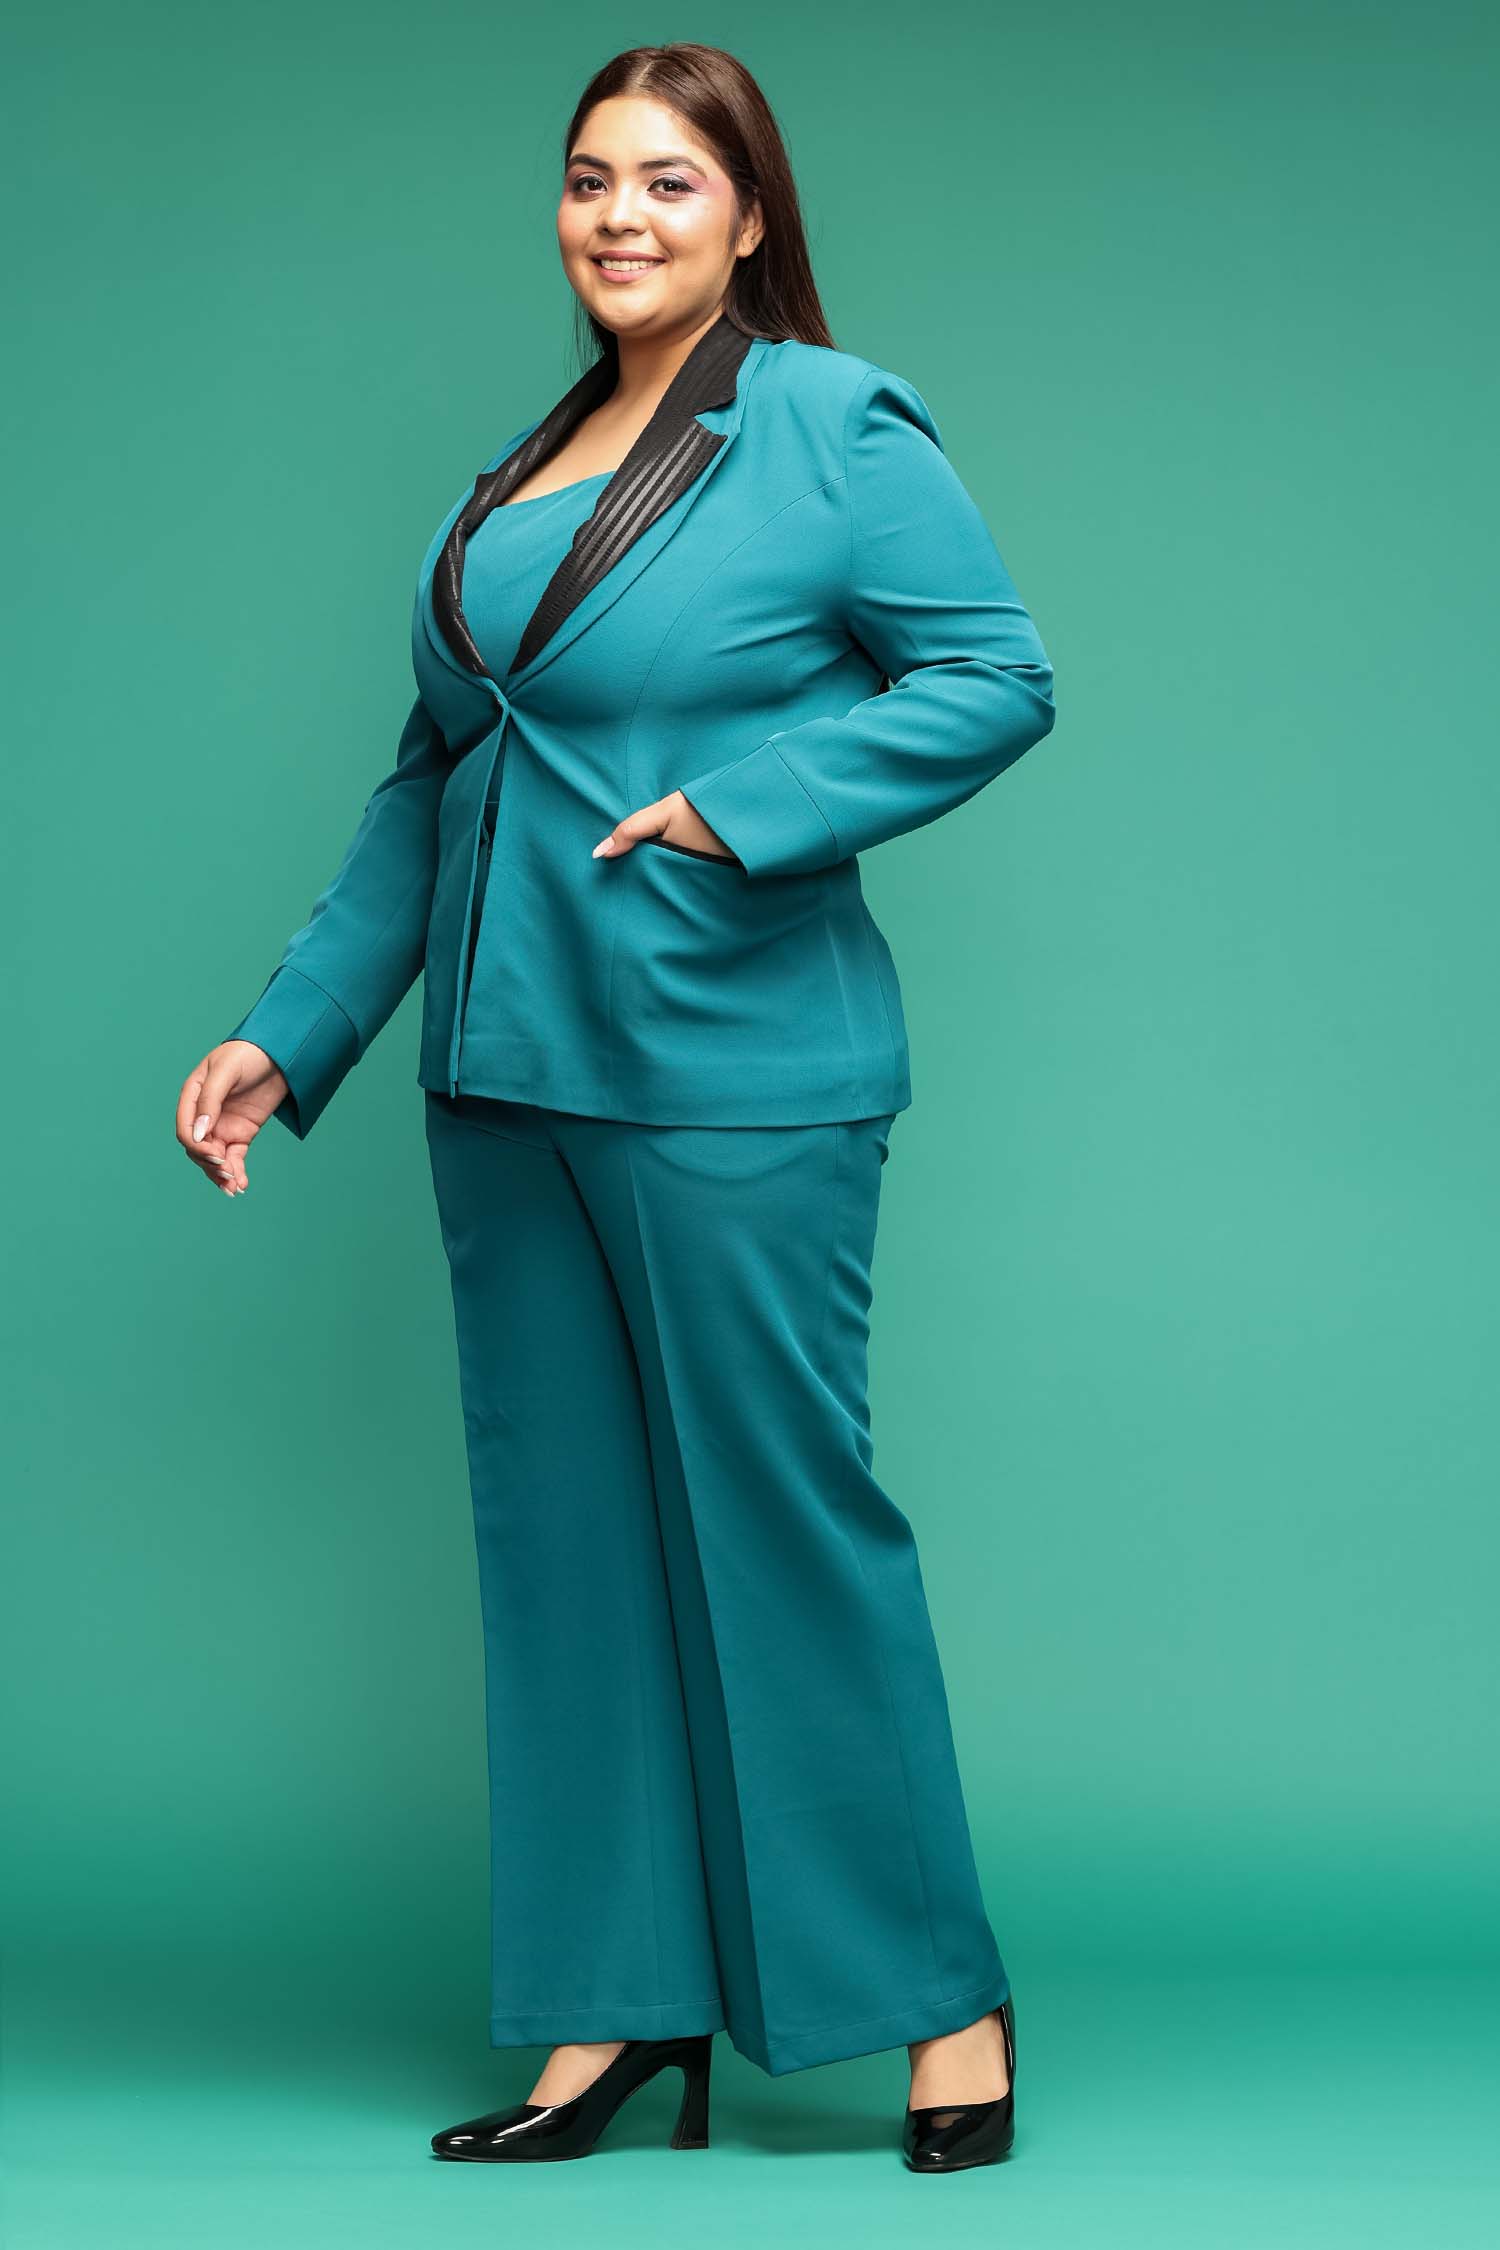 Double Collared Teal Blue Blazer with Crop Top and Flared Trouser